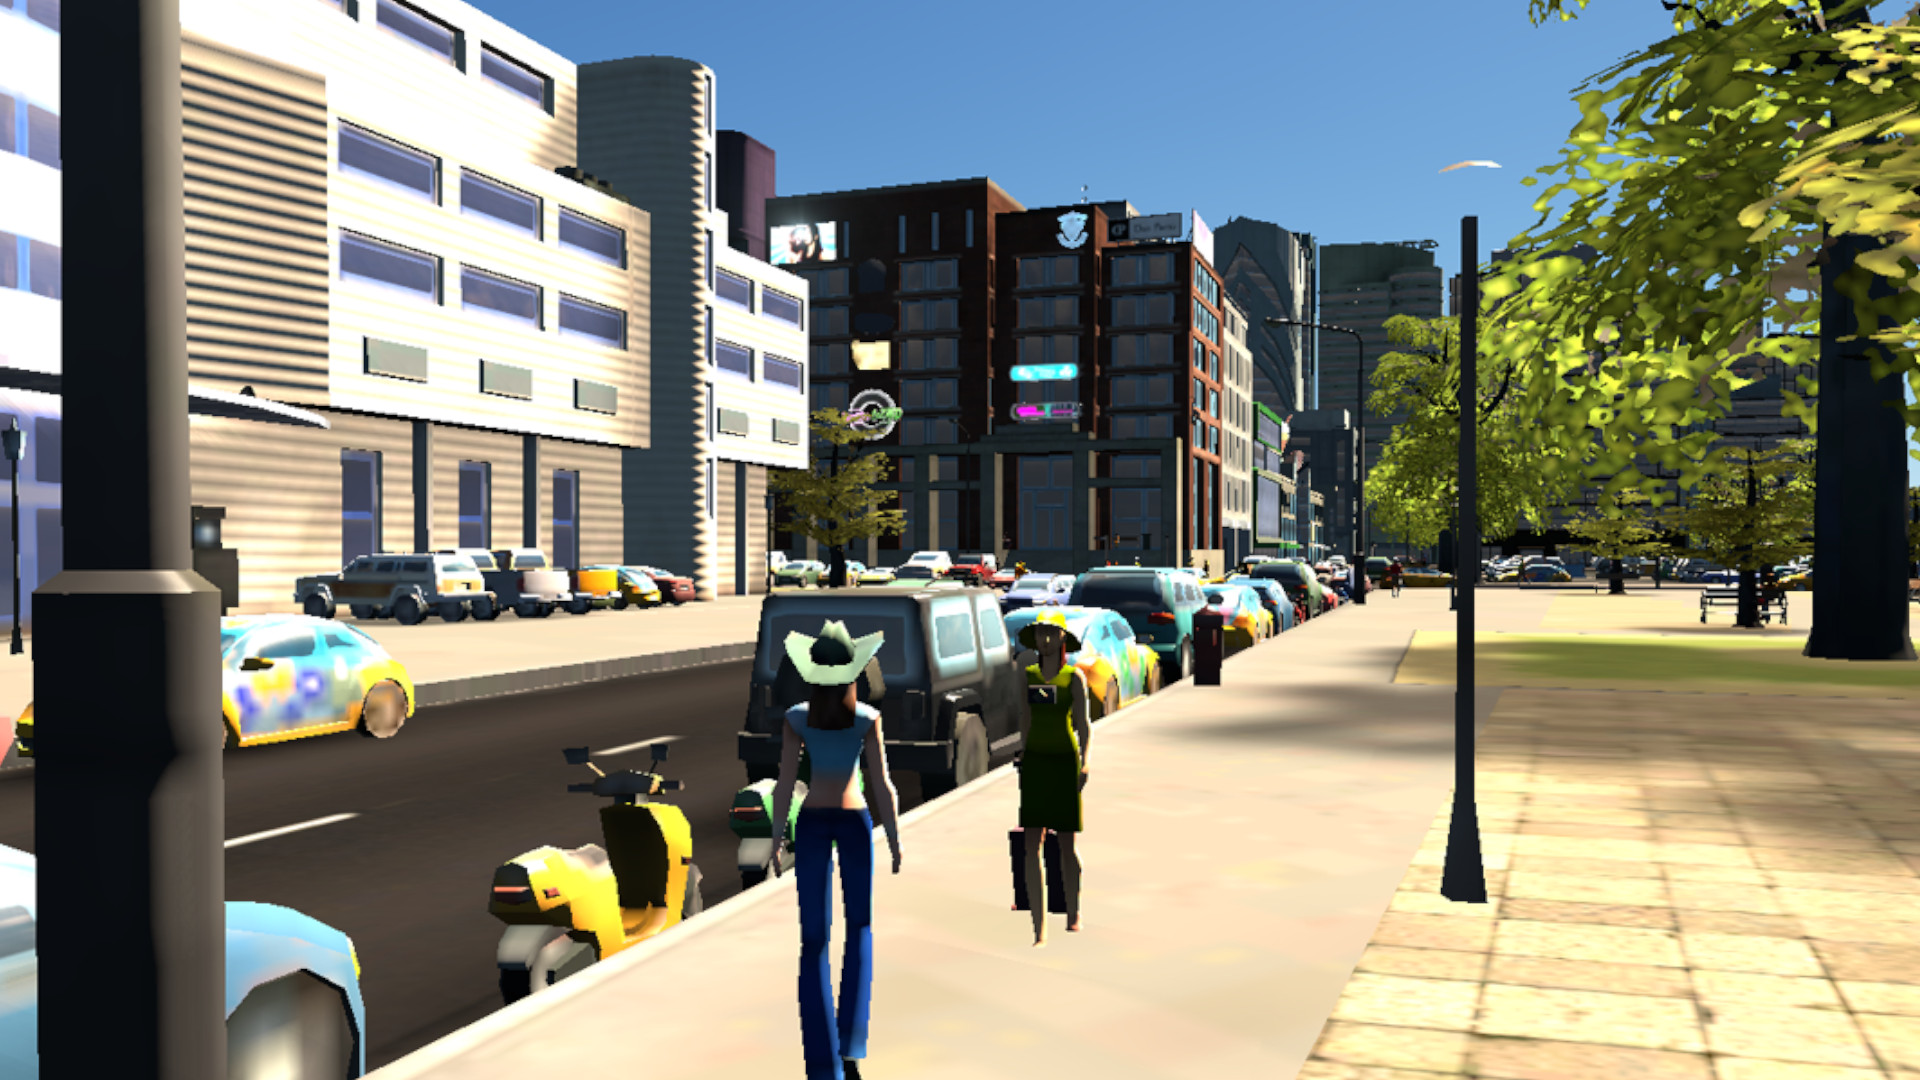 This Cities Skylines Mod Lets You Walk And Drive Around Your City Gta Style Pcgamesn